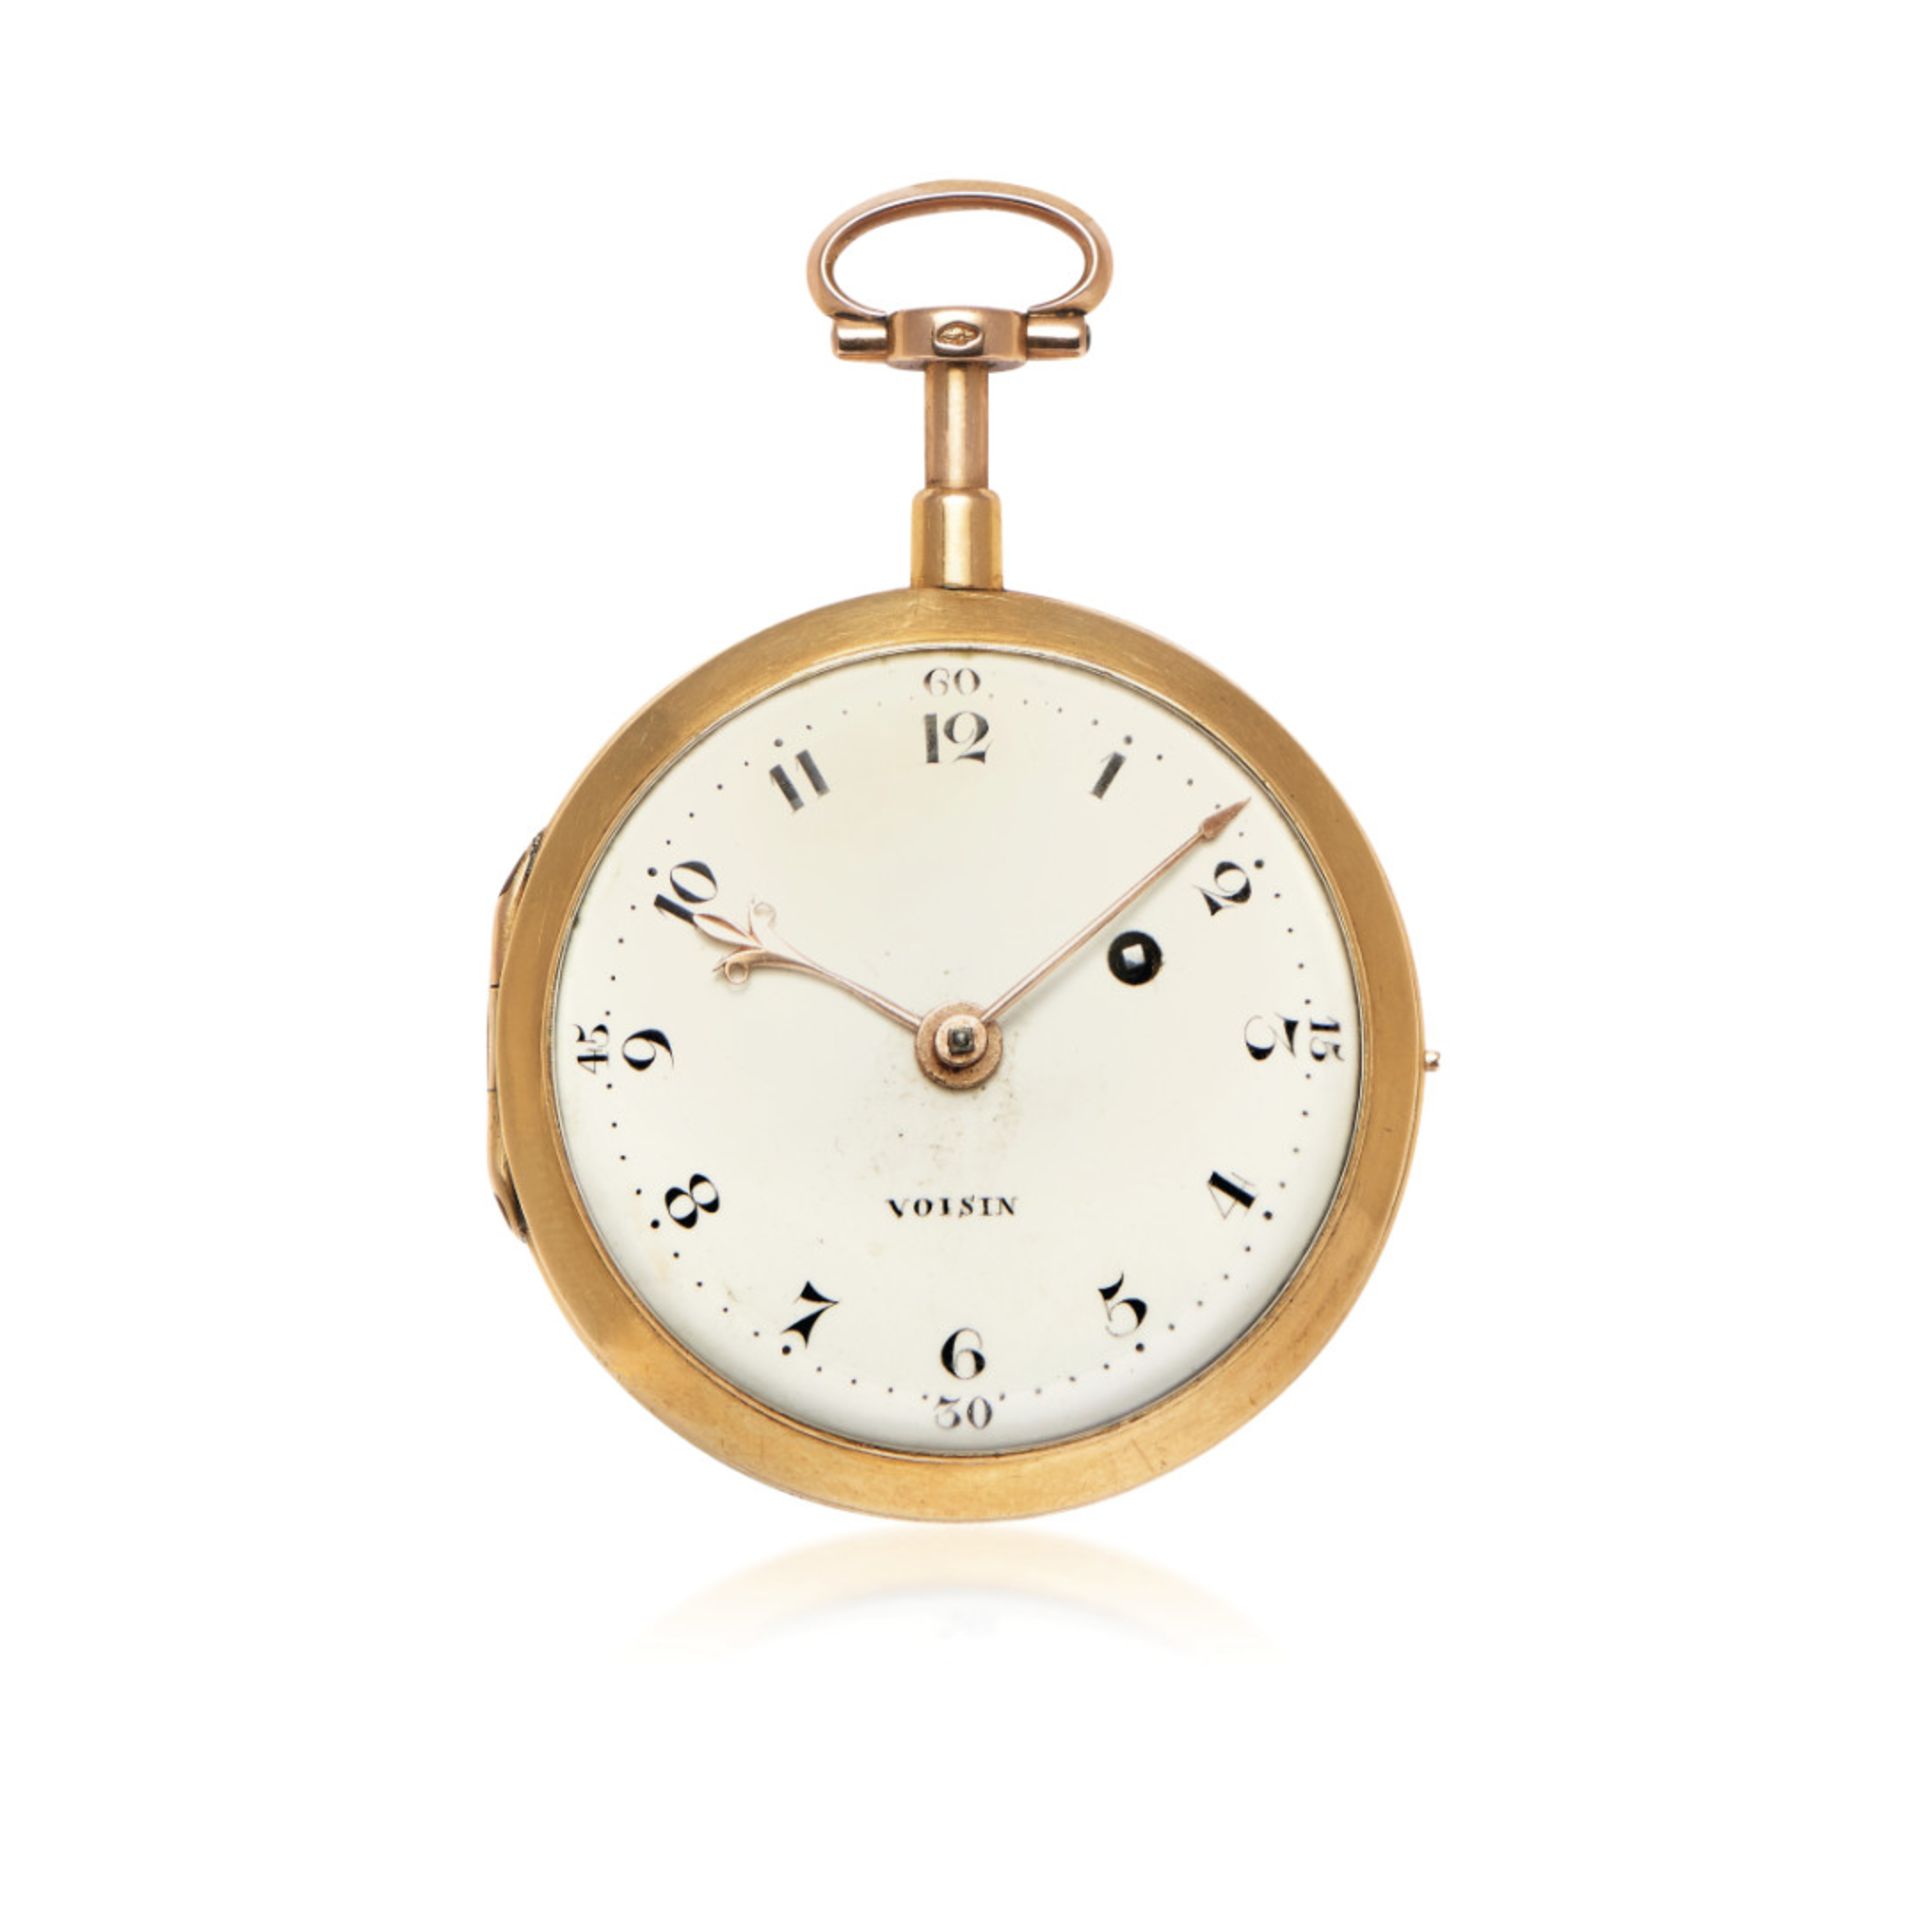 HENRY VOISIN REPEATER IN GOLD, CIRCA 1780 - HENRY VOISIN REPEATER IN GOLD, CIRCA 1780 Case: